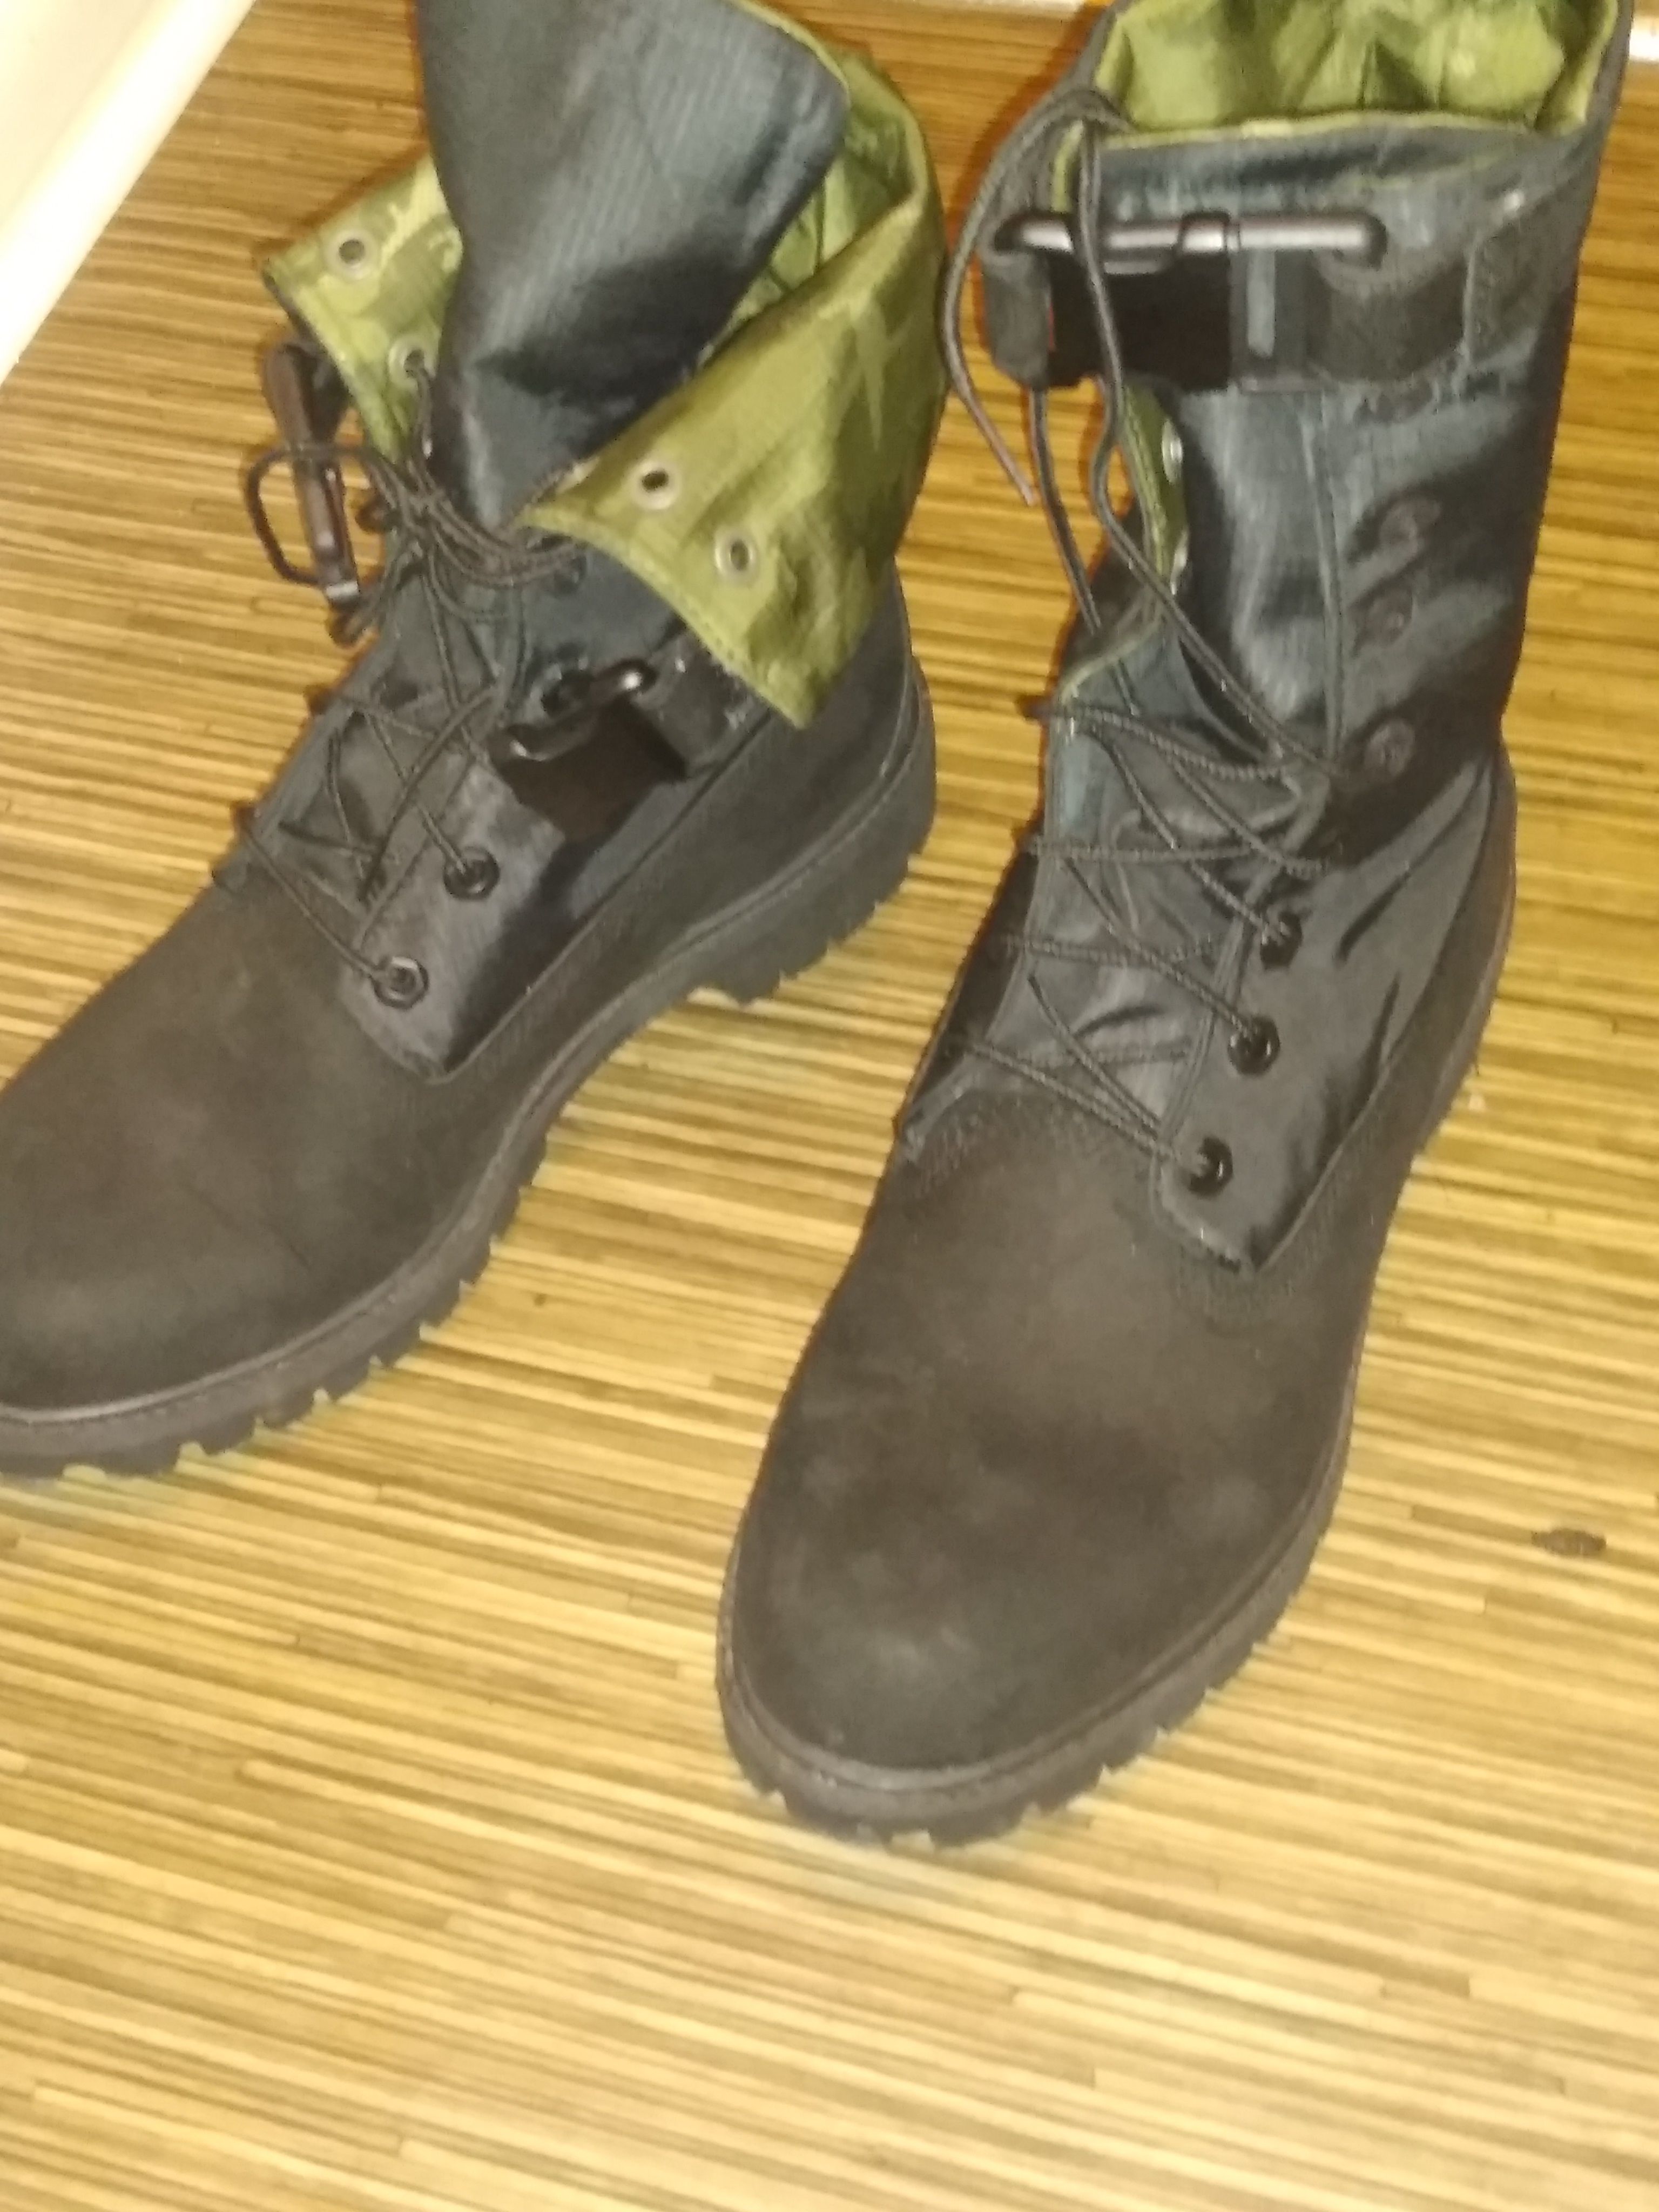 Limited edition Black and Camo Timberland boots